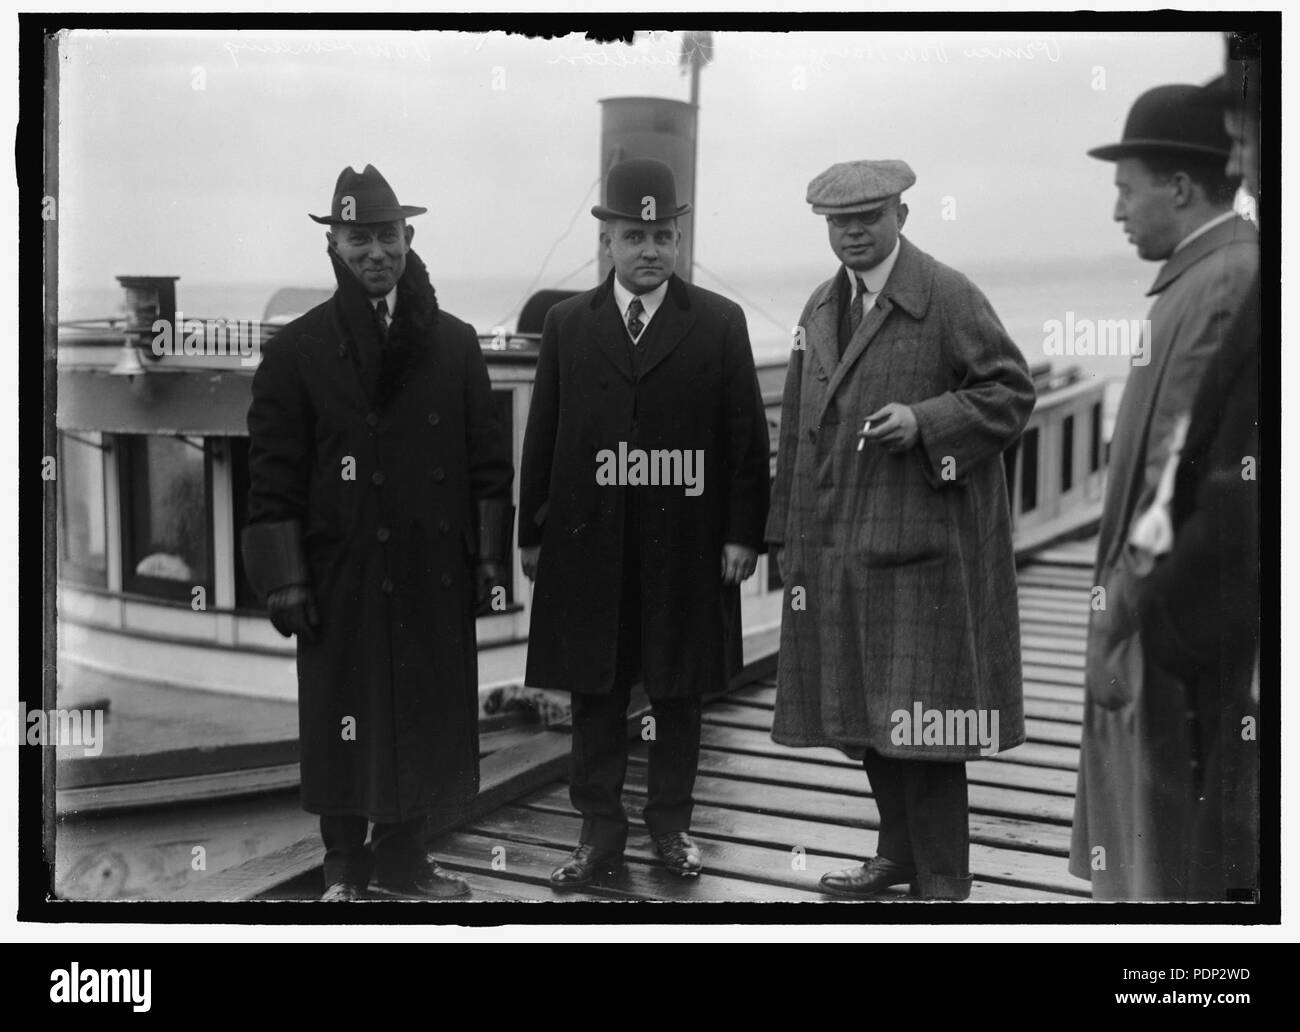 APPAM, H.M.S. BRITISH SHIP CAPTURED BY GERMANS, INTERNED IN U.S. SCENE AT NEWPORT NEWS, VA. WHEN APPAM WAS RUN INTO PORT BY GERMANS- VON SCHILLING VICE COUNSUL OF NEWPORT NEWS; COLLECTOR OF Stock Photo